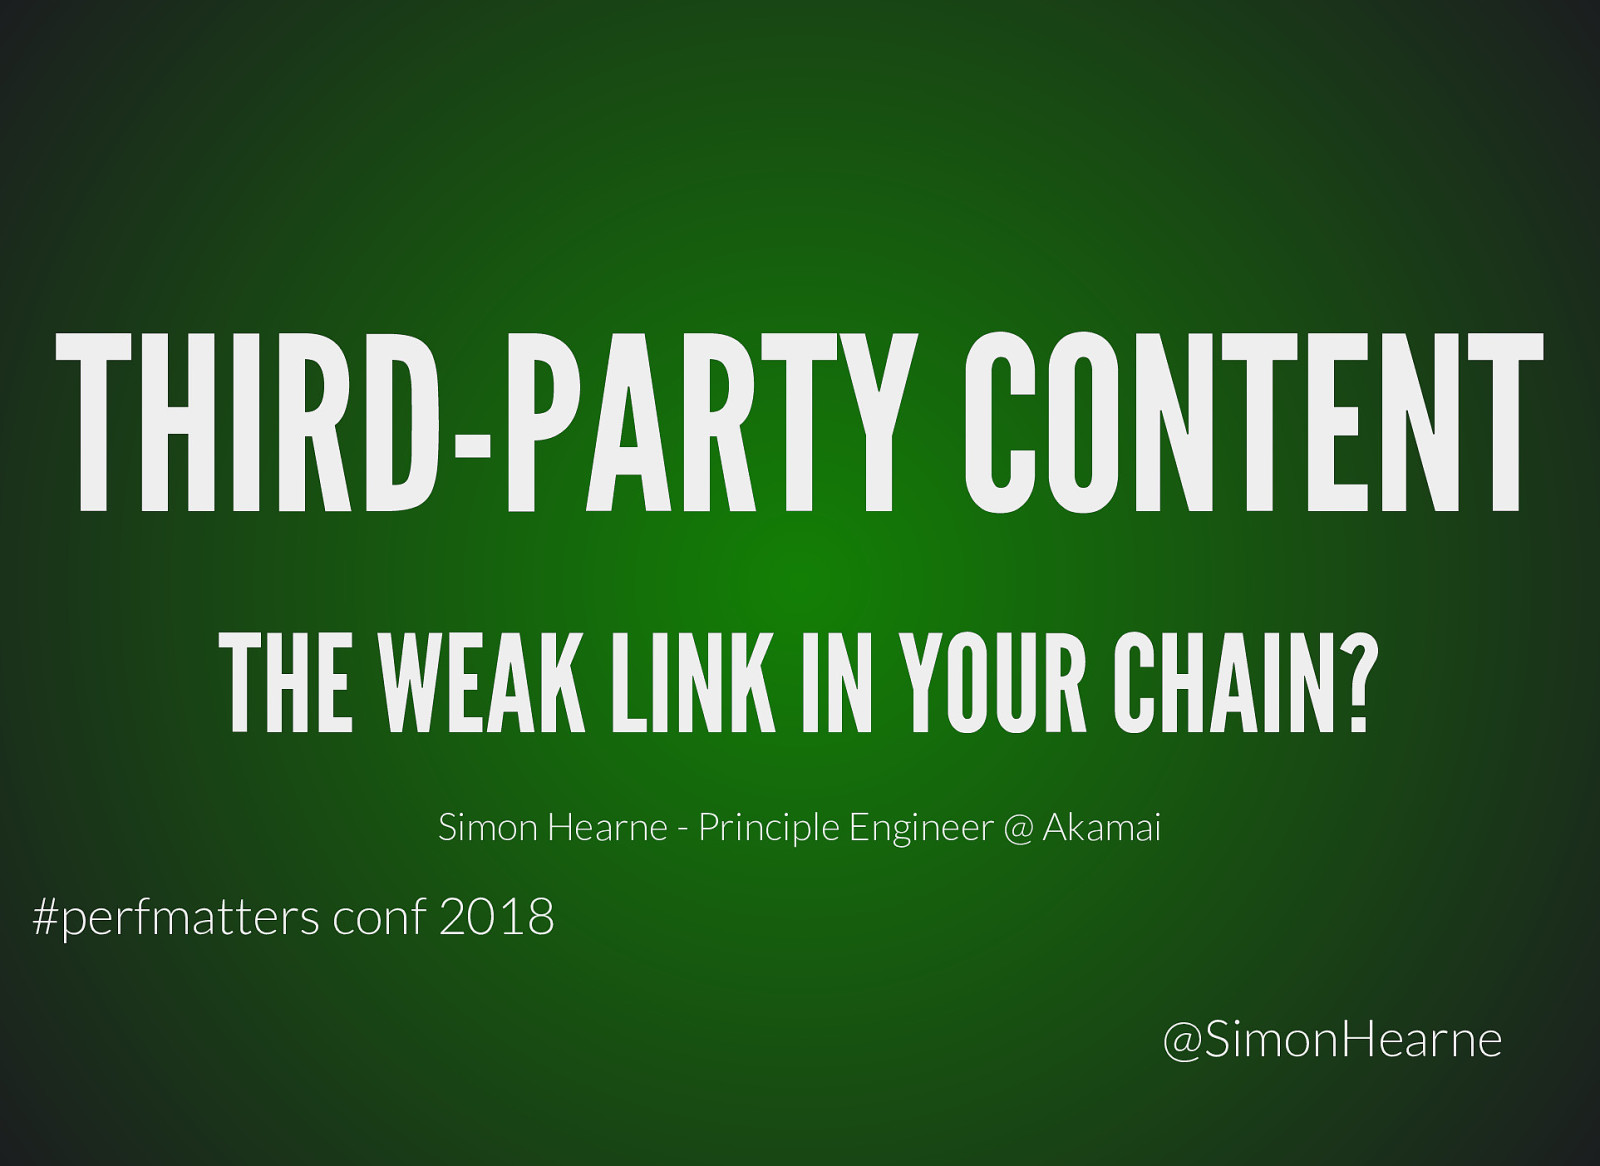 Third-party content: the weak link in the chain